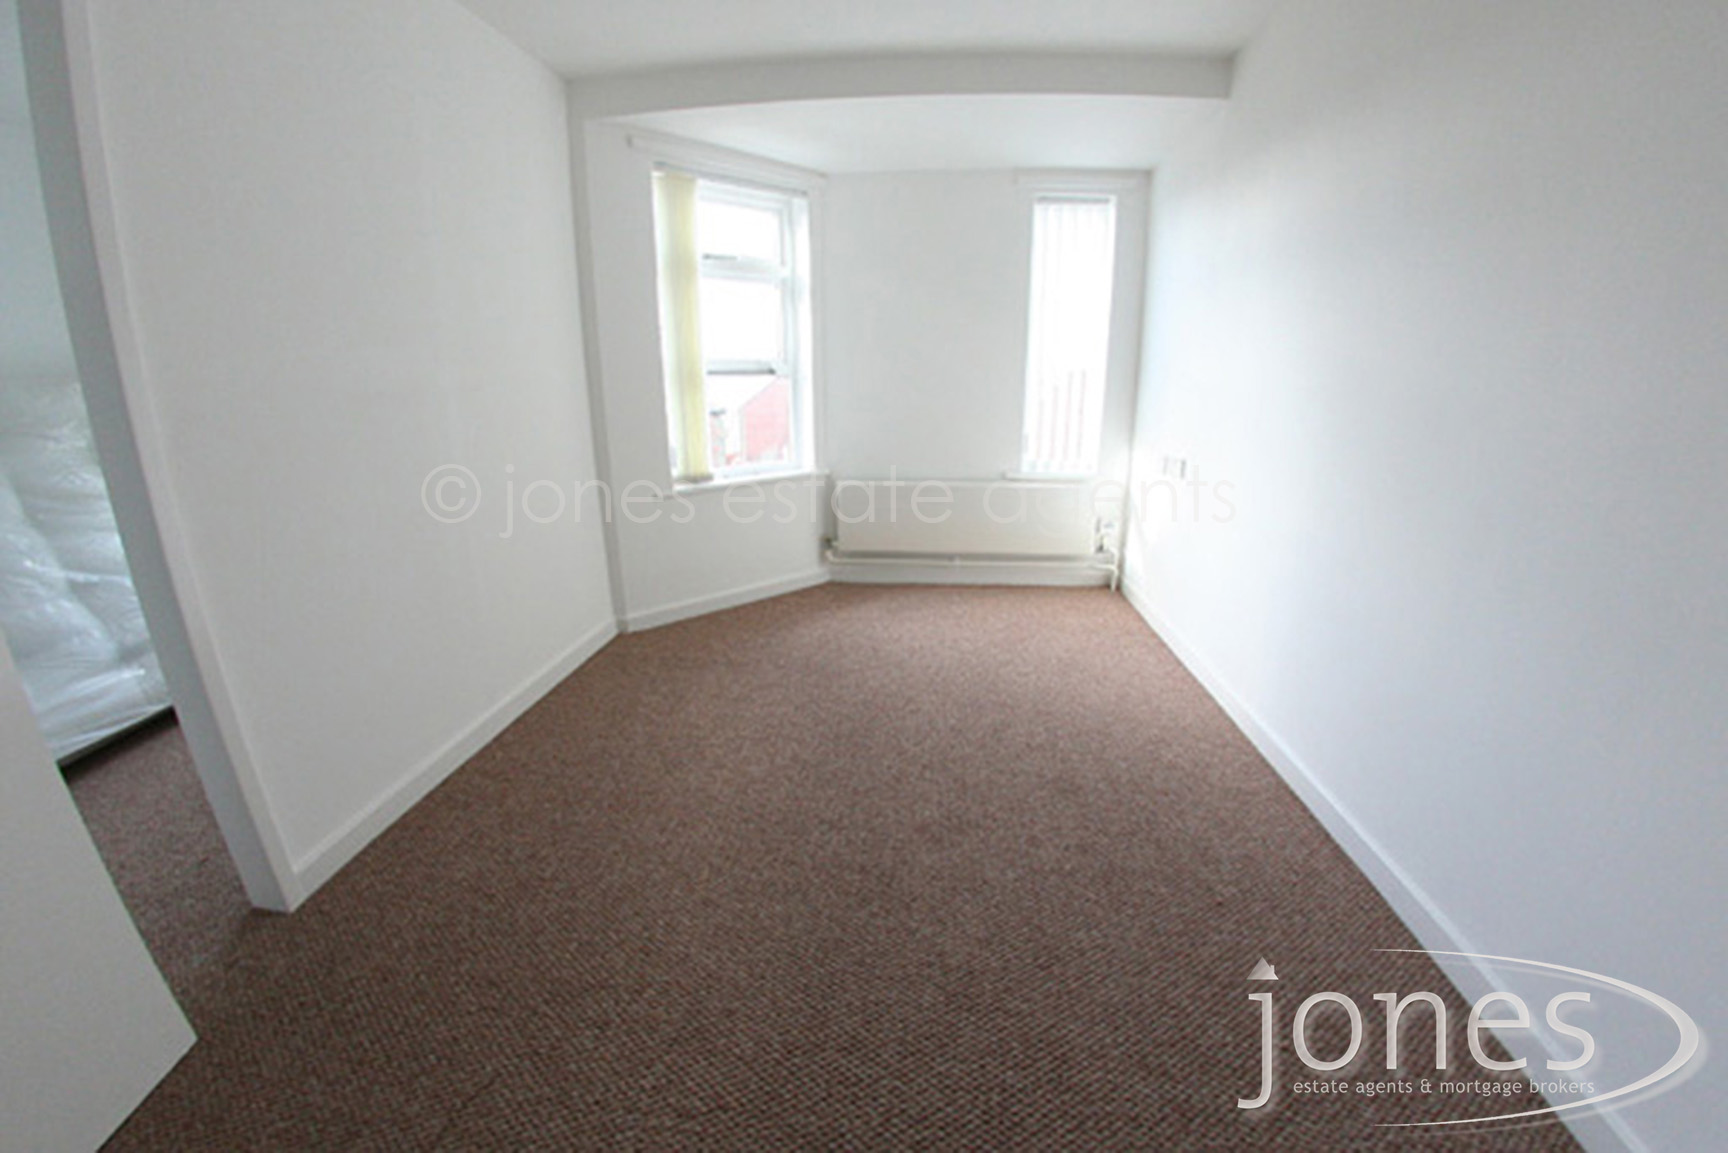 Home for Sale Let - Photo 02 GALLEYSFIELDS COURT-Flat 19, The Headland, Hartlepool, TS24 0NB